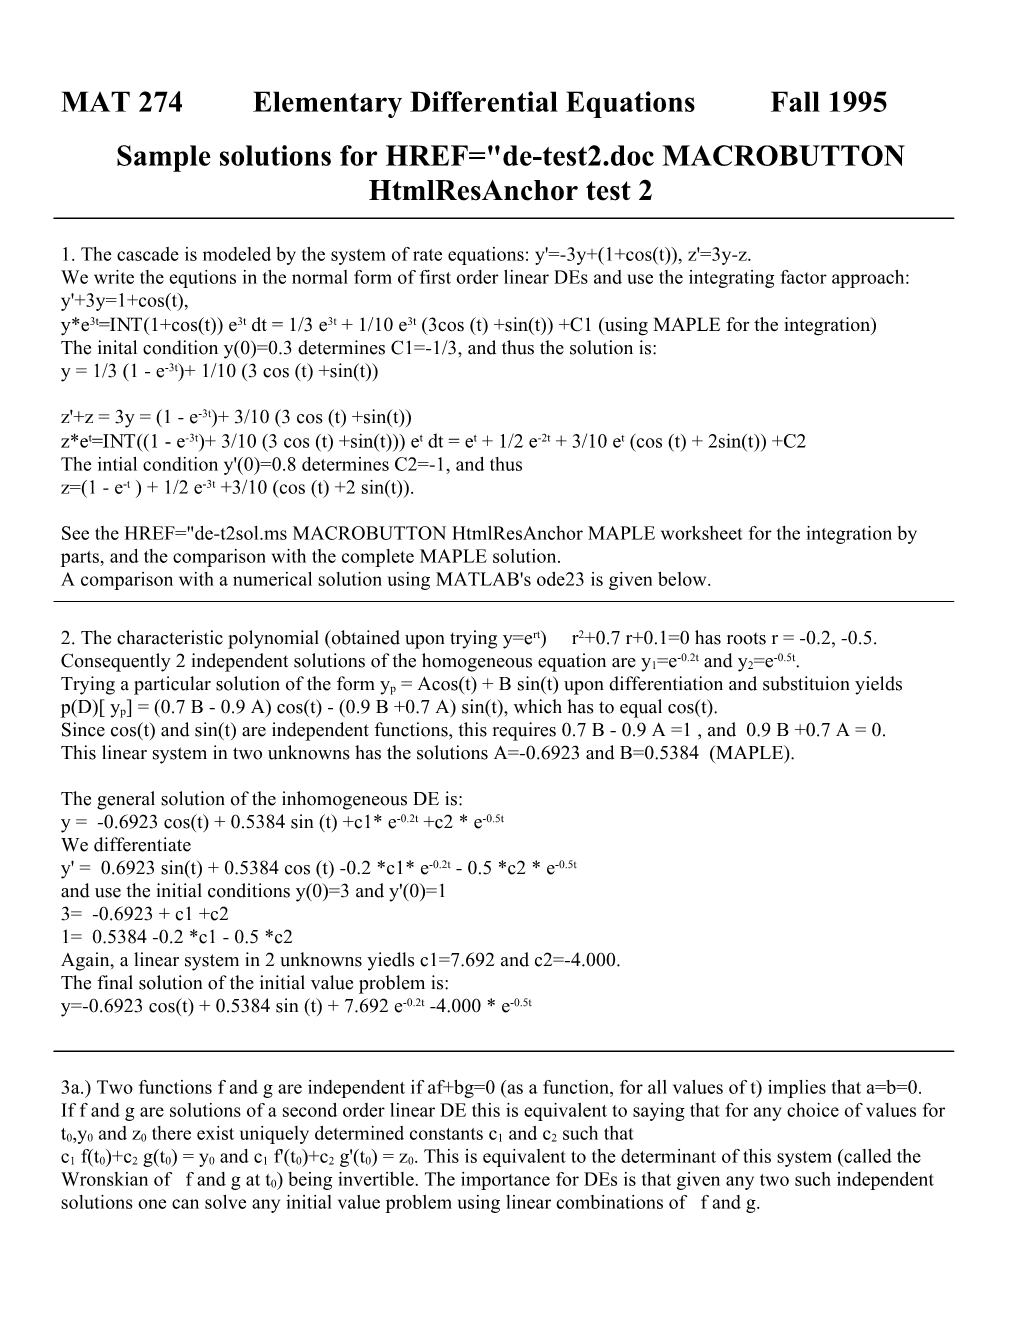 Sample Solutions for Test 2